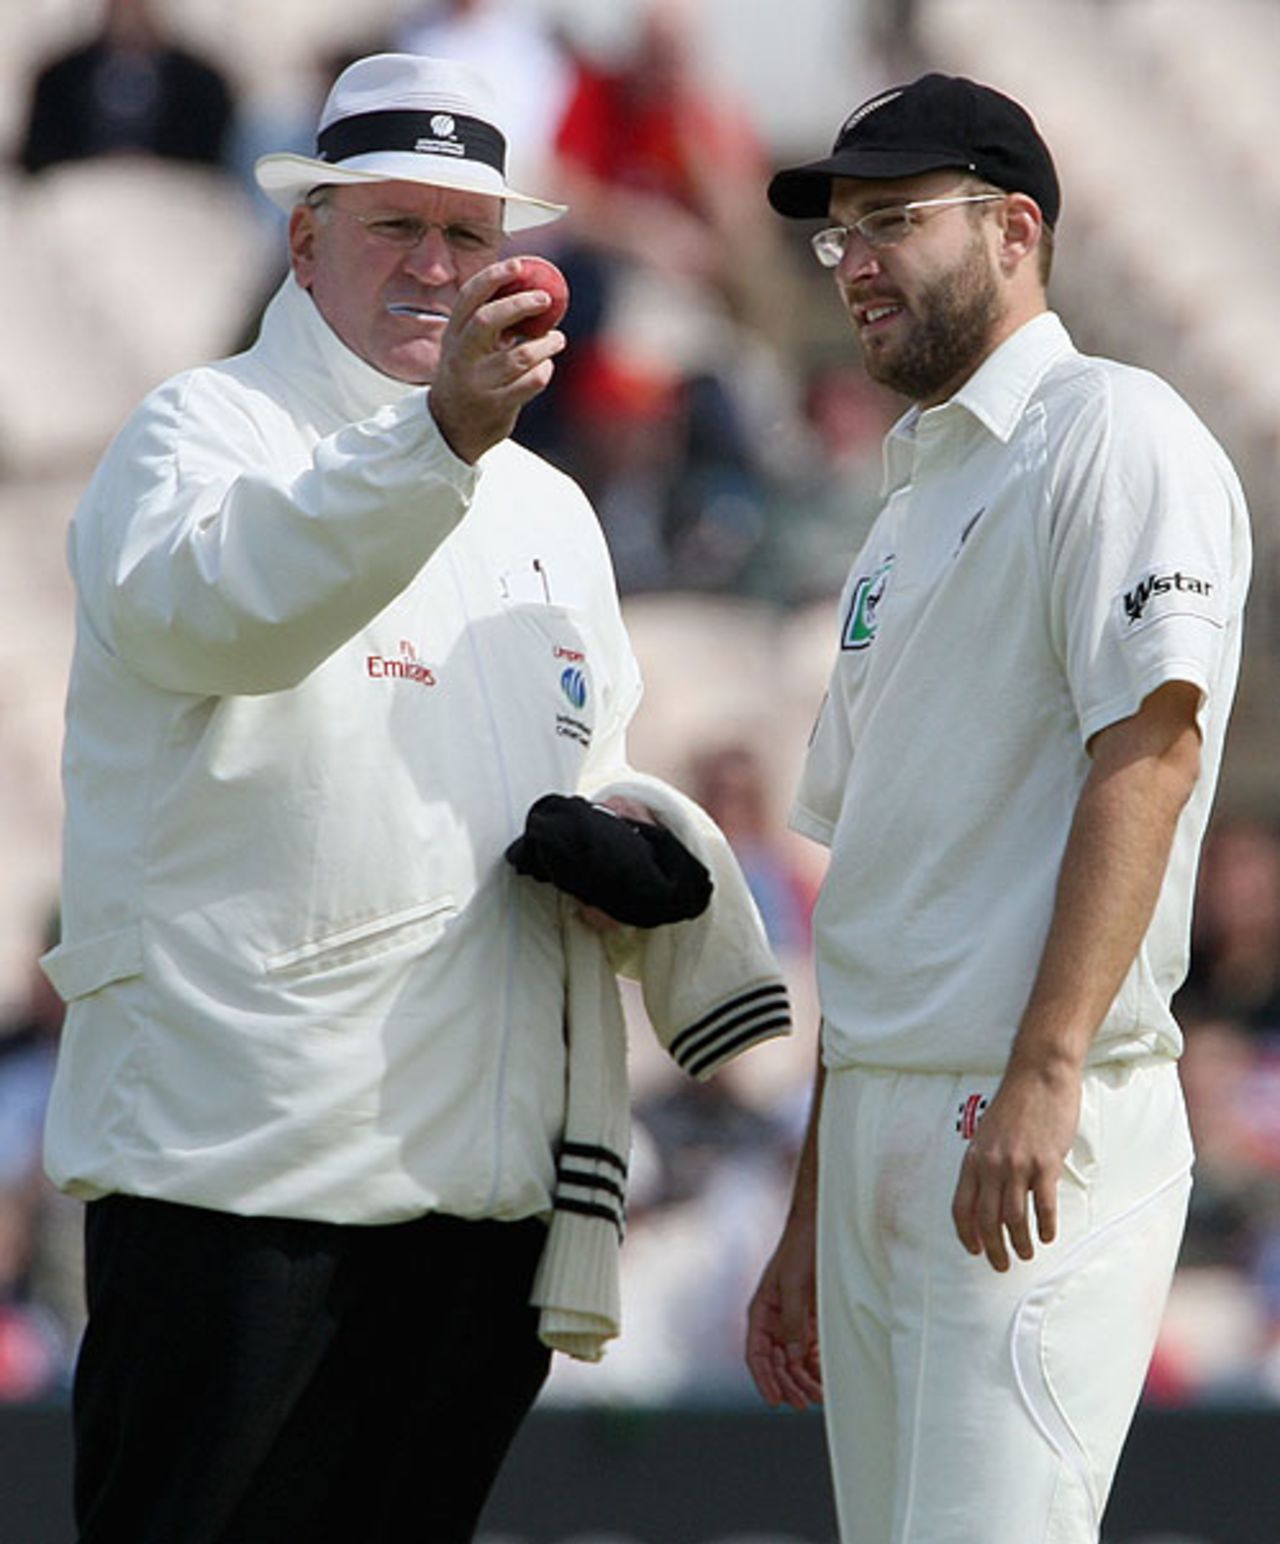 Darrell Hair and Daniel Vettori inspect the ball at Old Trafford, England v New Zealand, 2nd Test, Old Trafford, May 25, 2008